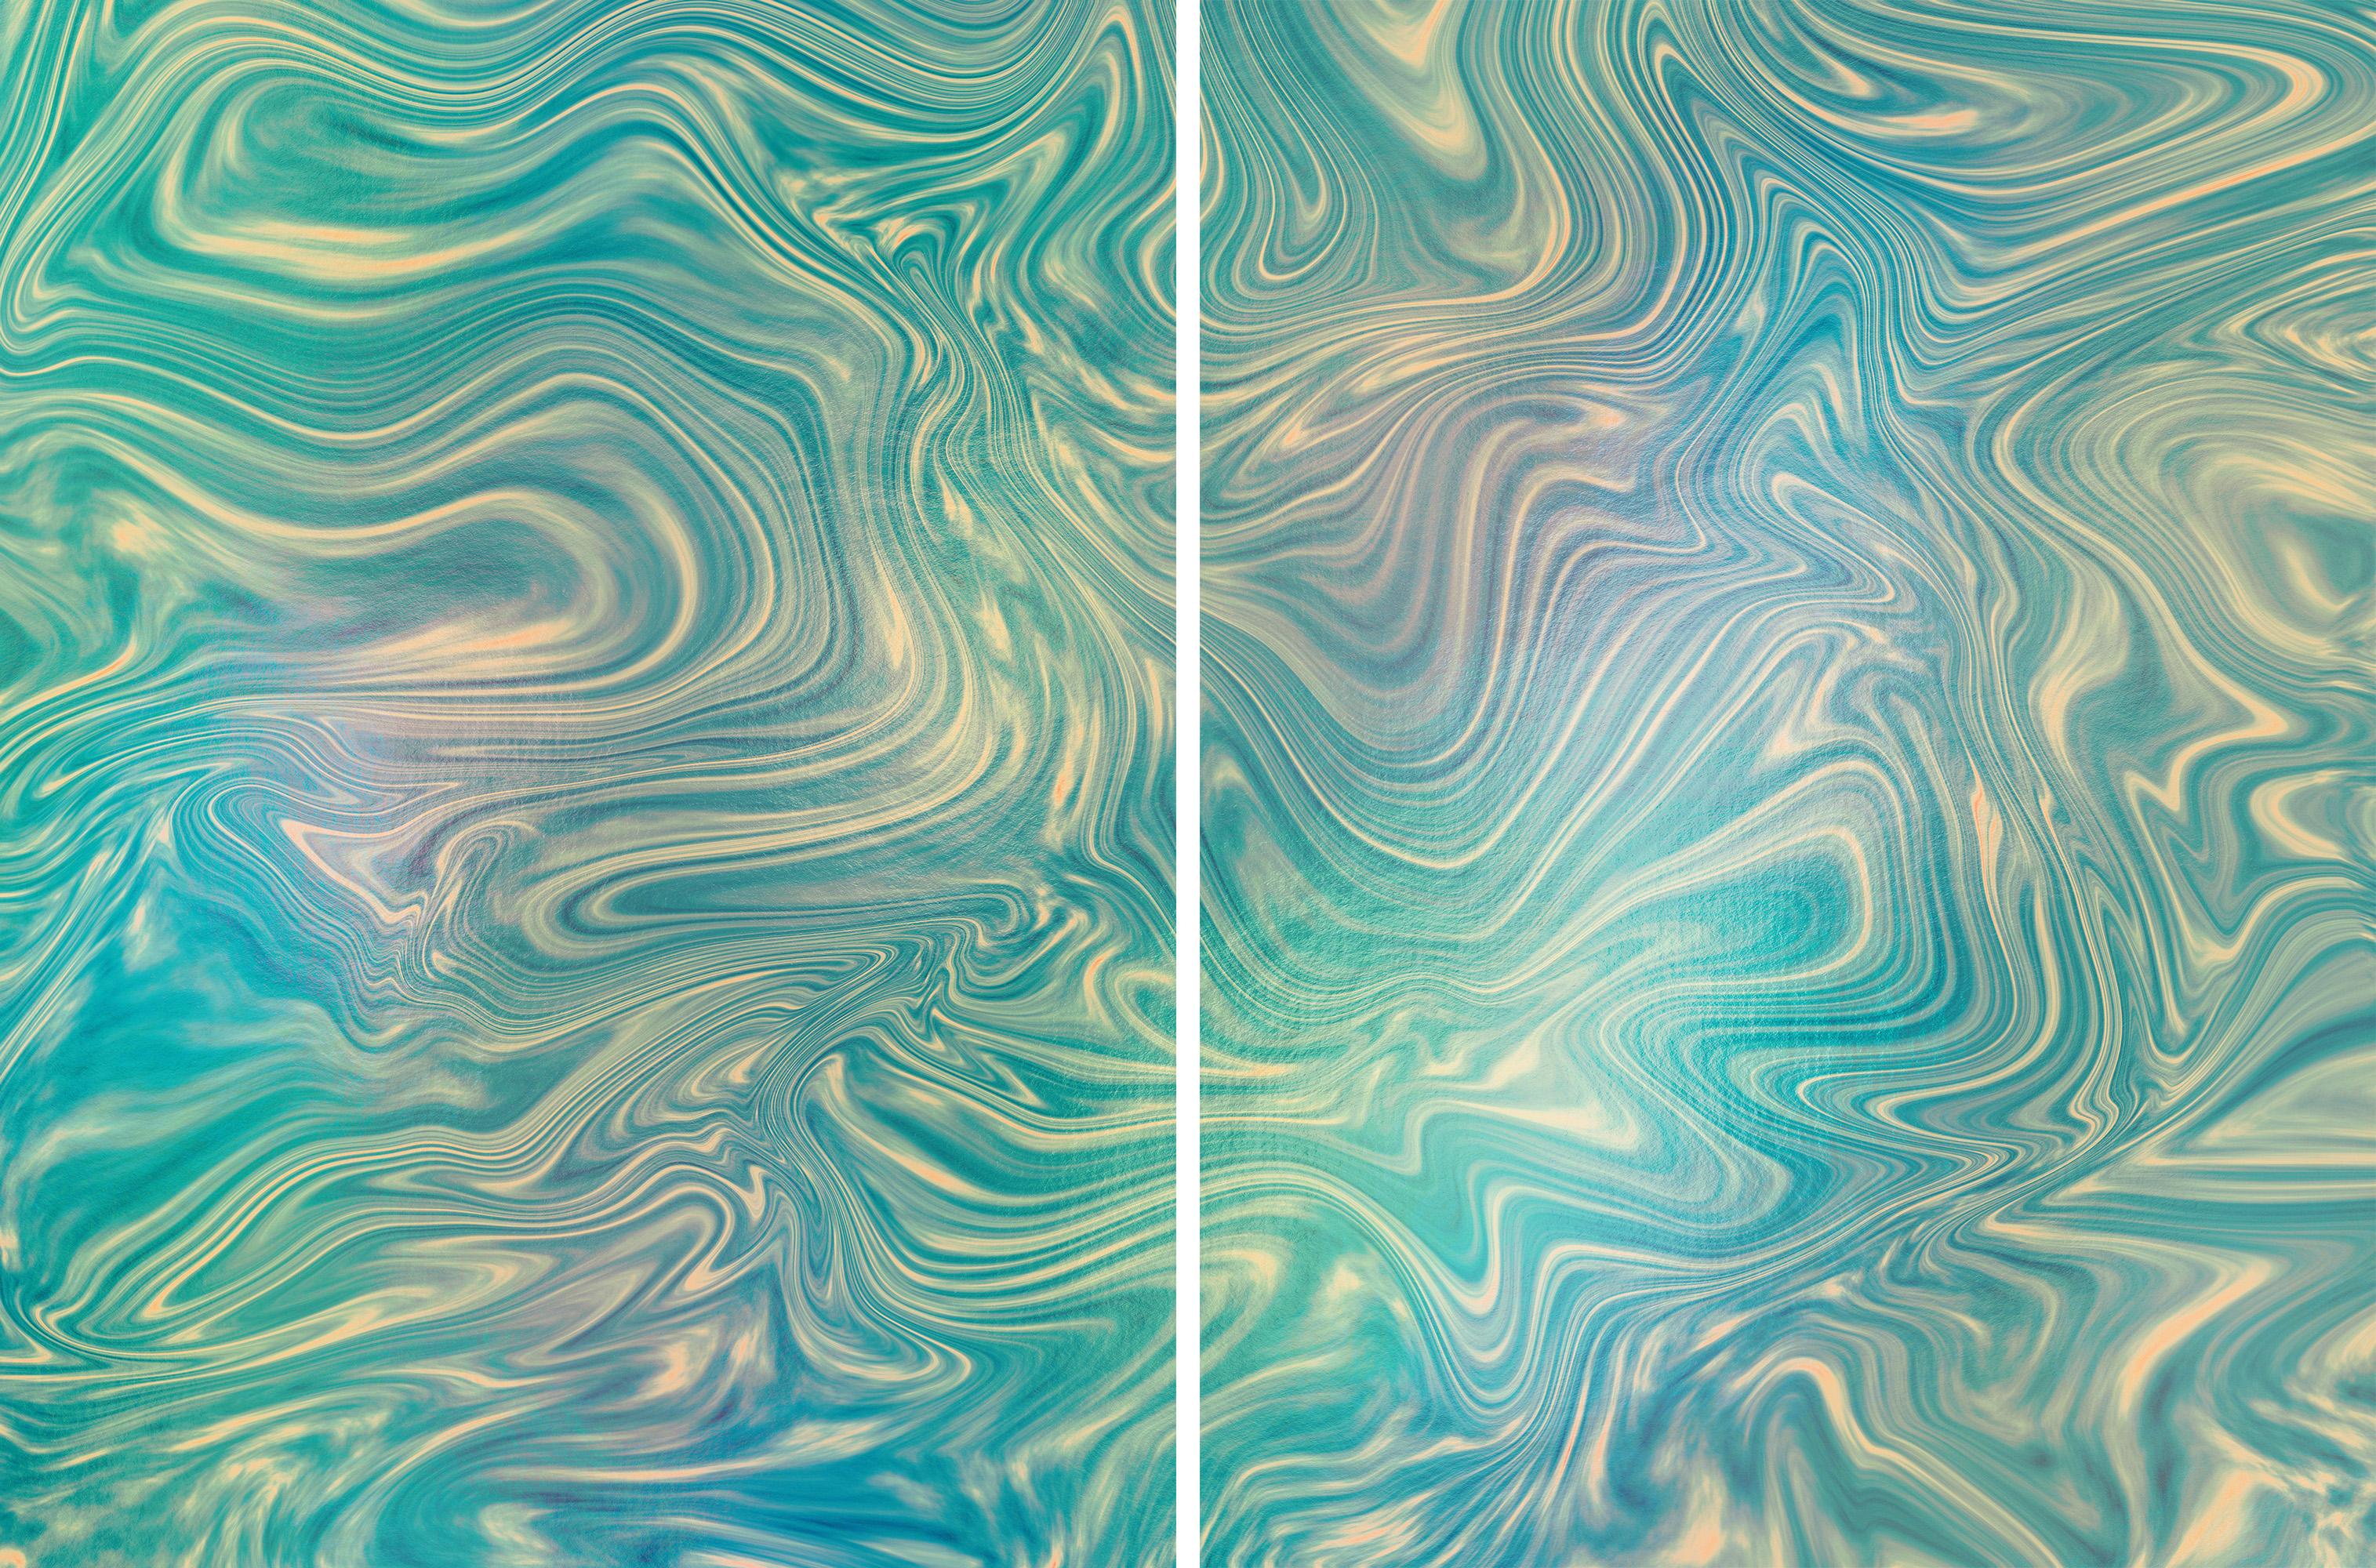 Marble Reflections Diptych in Green Emerald Stone, Pale Swirls, Abstract Shapes - Contemporary Photograph by Ryan Rivadeneyra